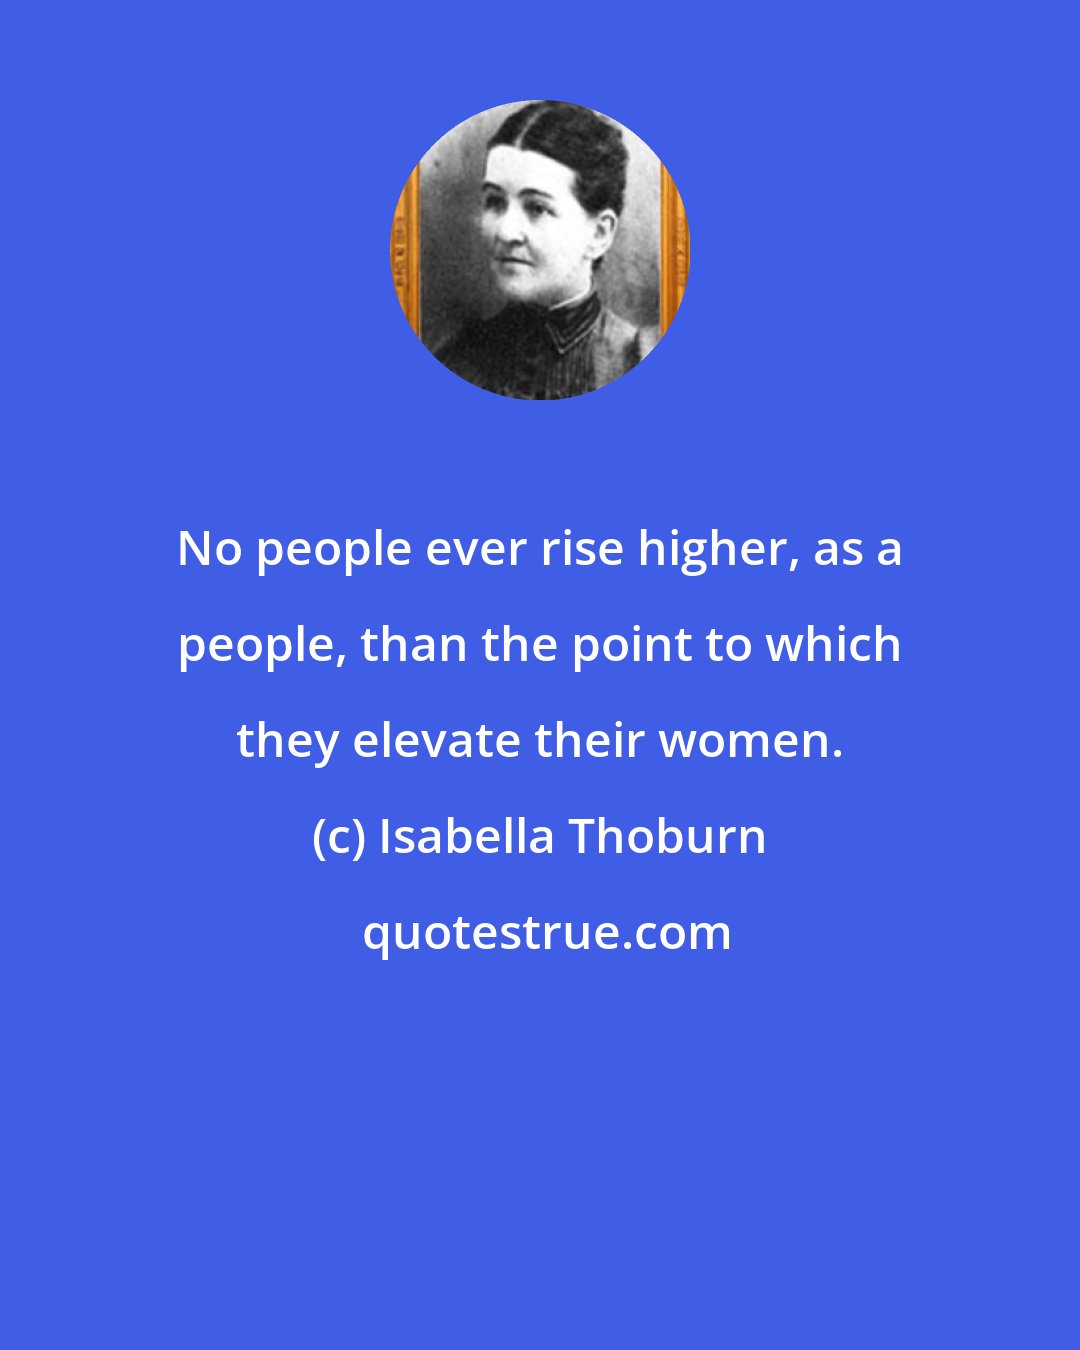 Isabella Thoburn: No people ever rise higher, as a people, than the point to which they elevate their women.